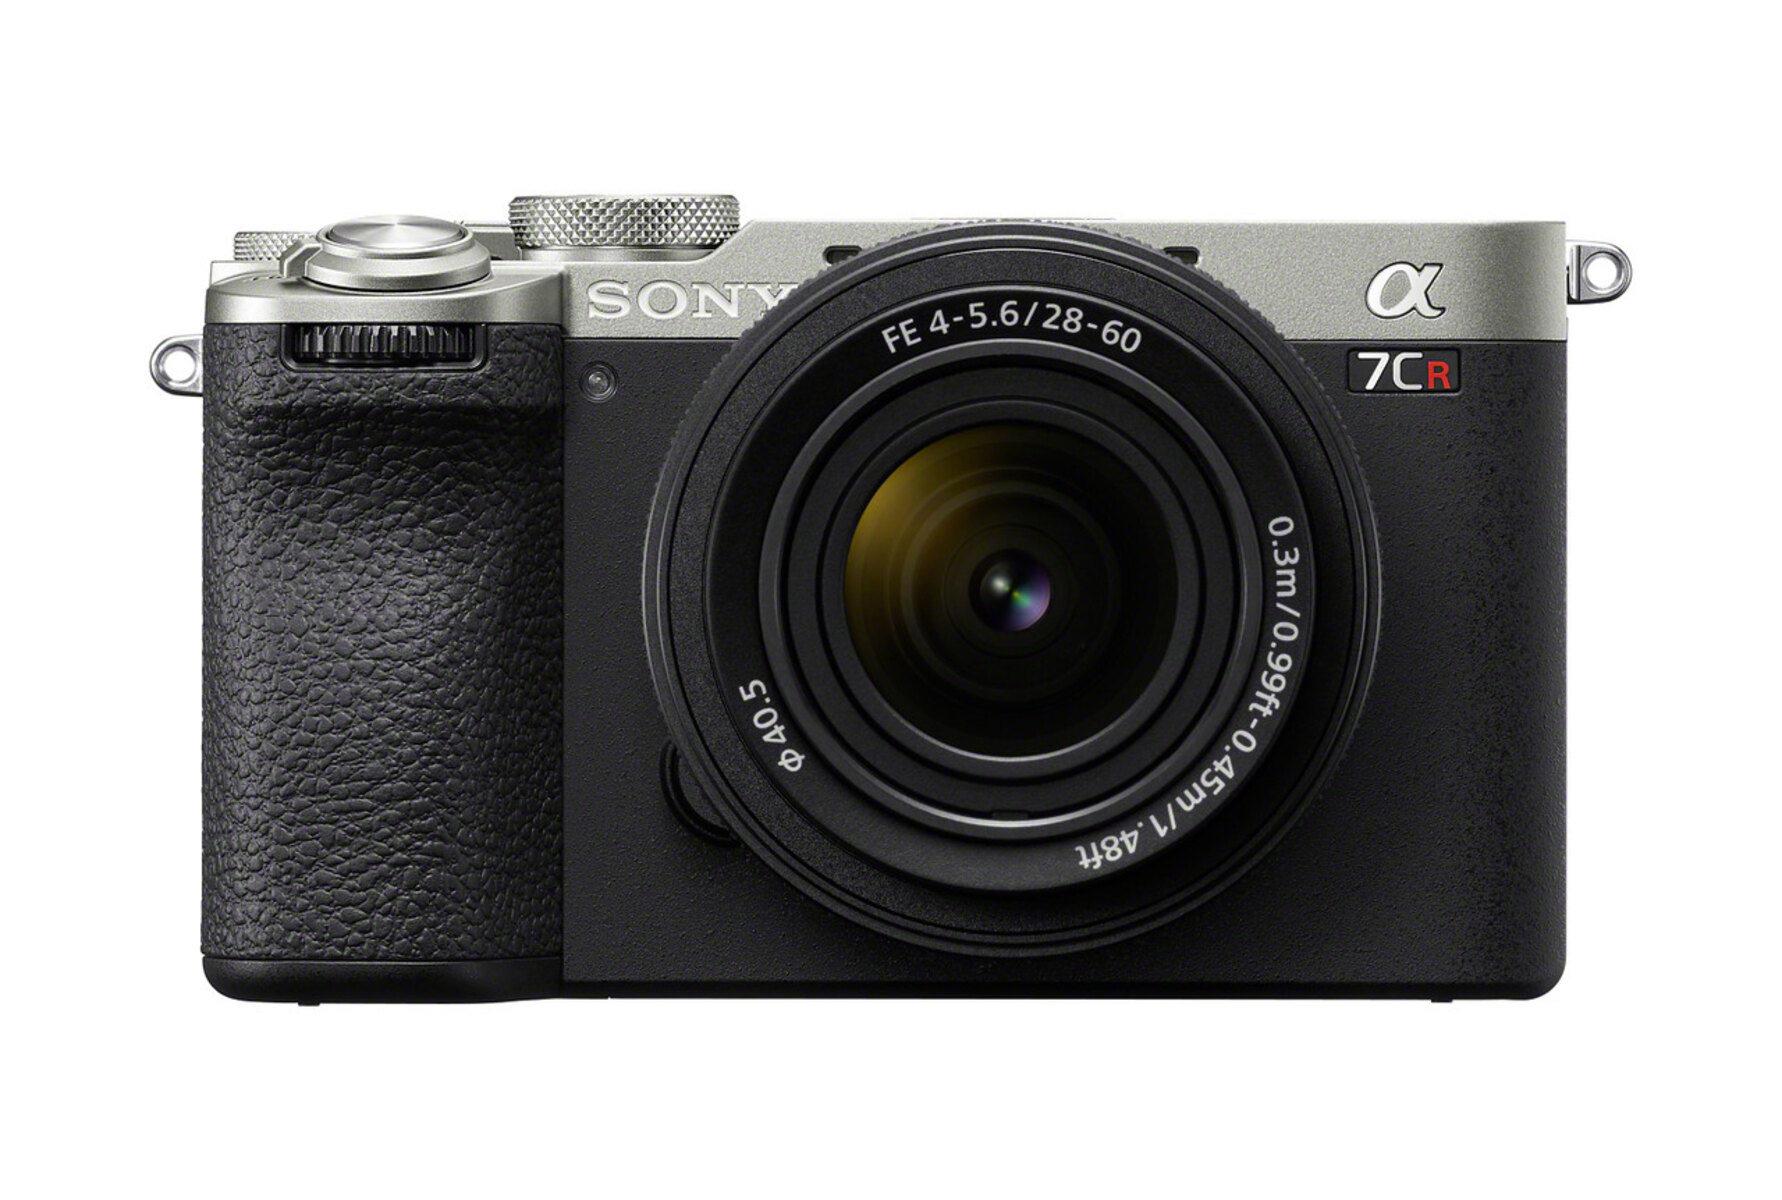 Which Sony Mirrorless Camera Has AEB Of 5 Exposures?